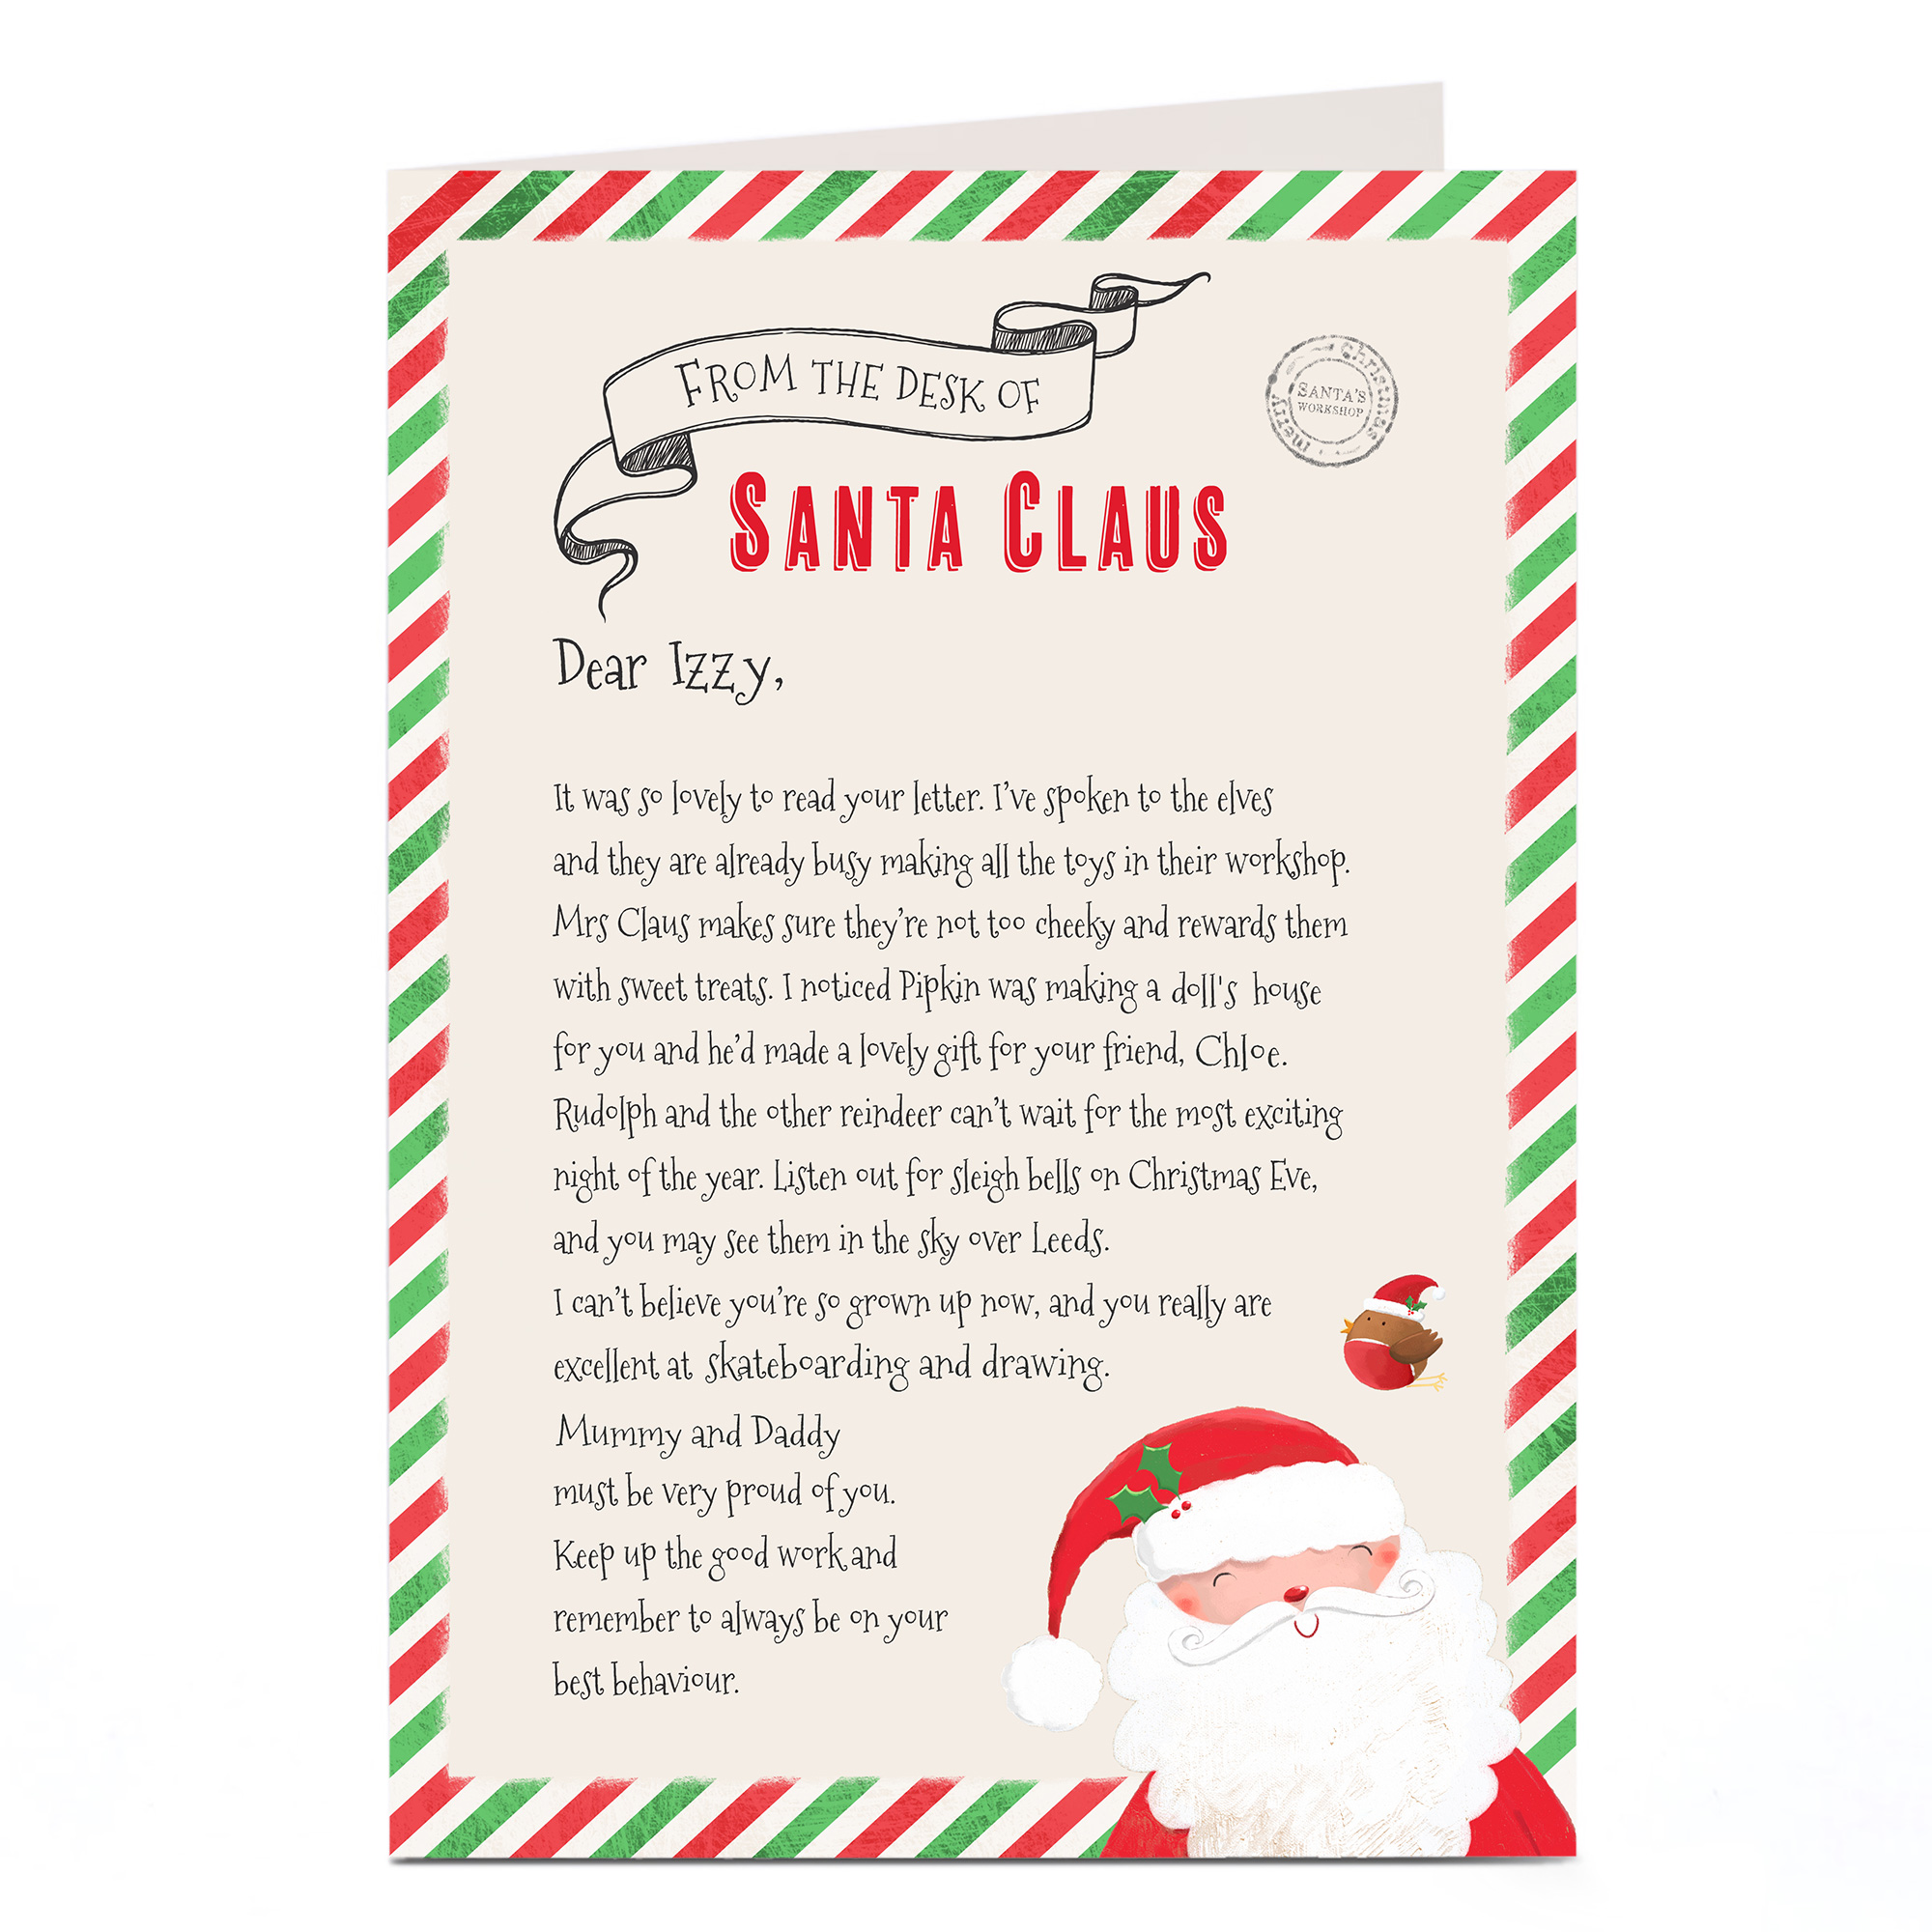 buy-personalised-letter-from-santa-desk-of-santa-claus-for-gbp-1-79-card-factory-uk